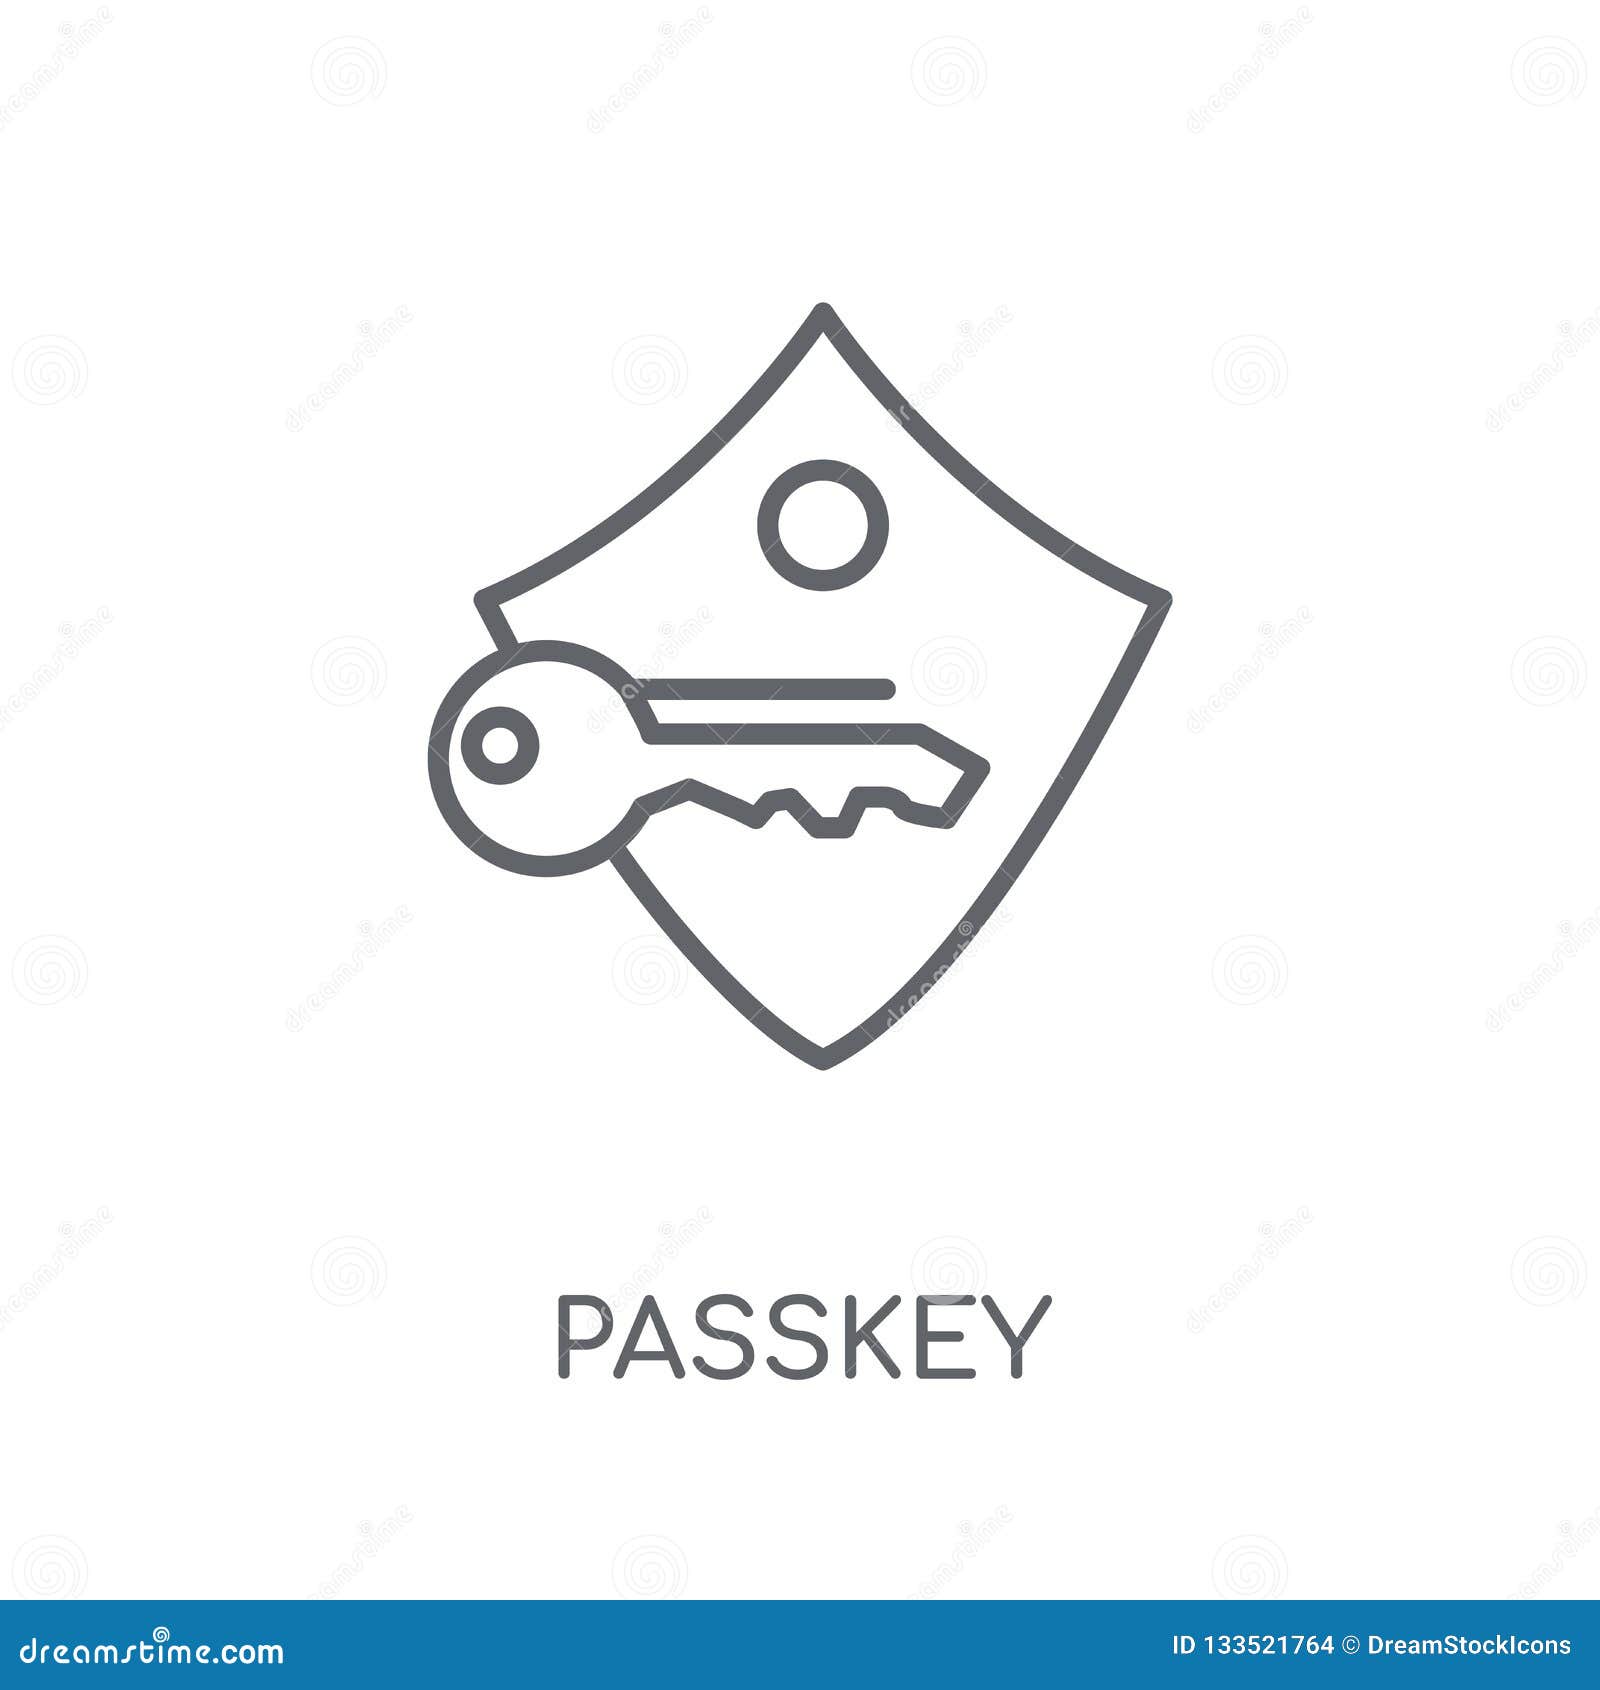 passkey linear icon. modern outline passkey logo concept on whit